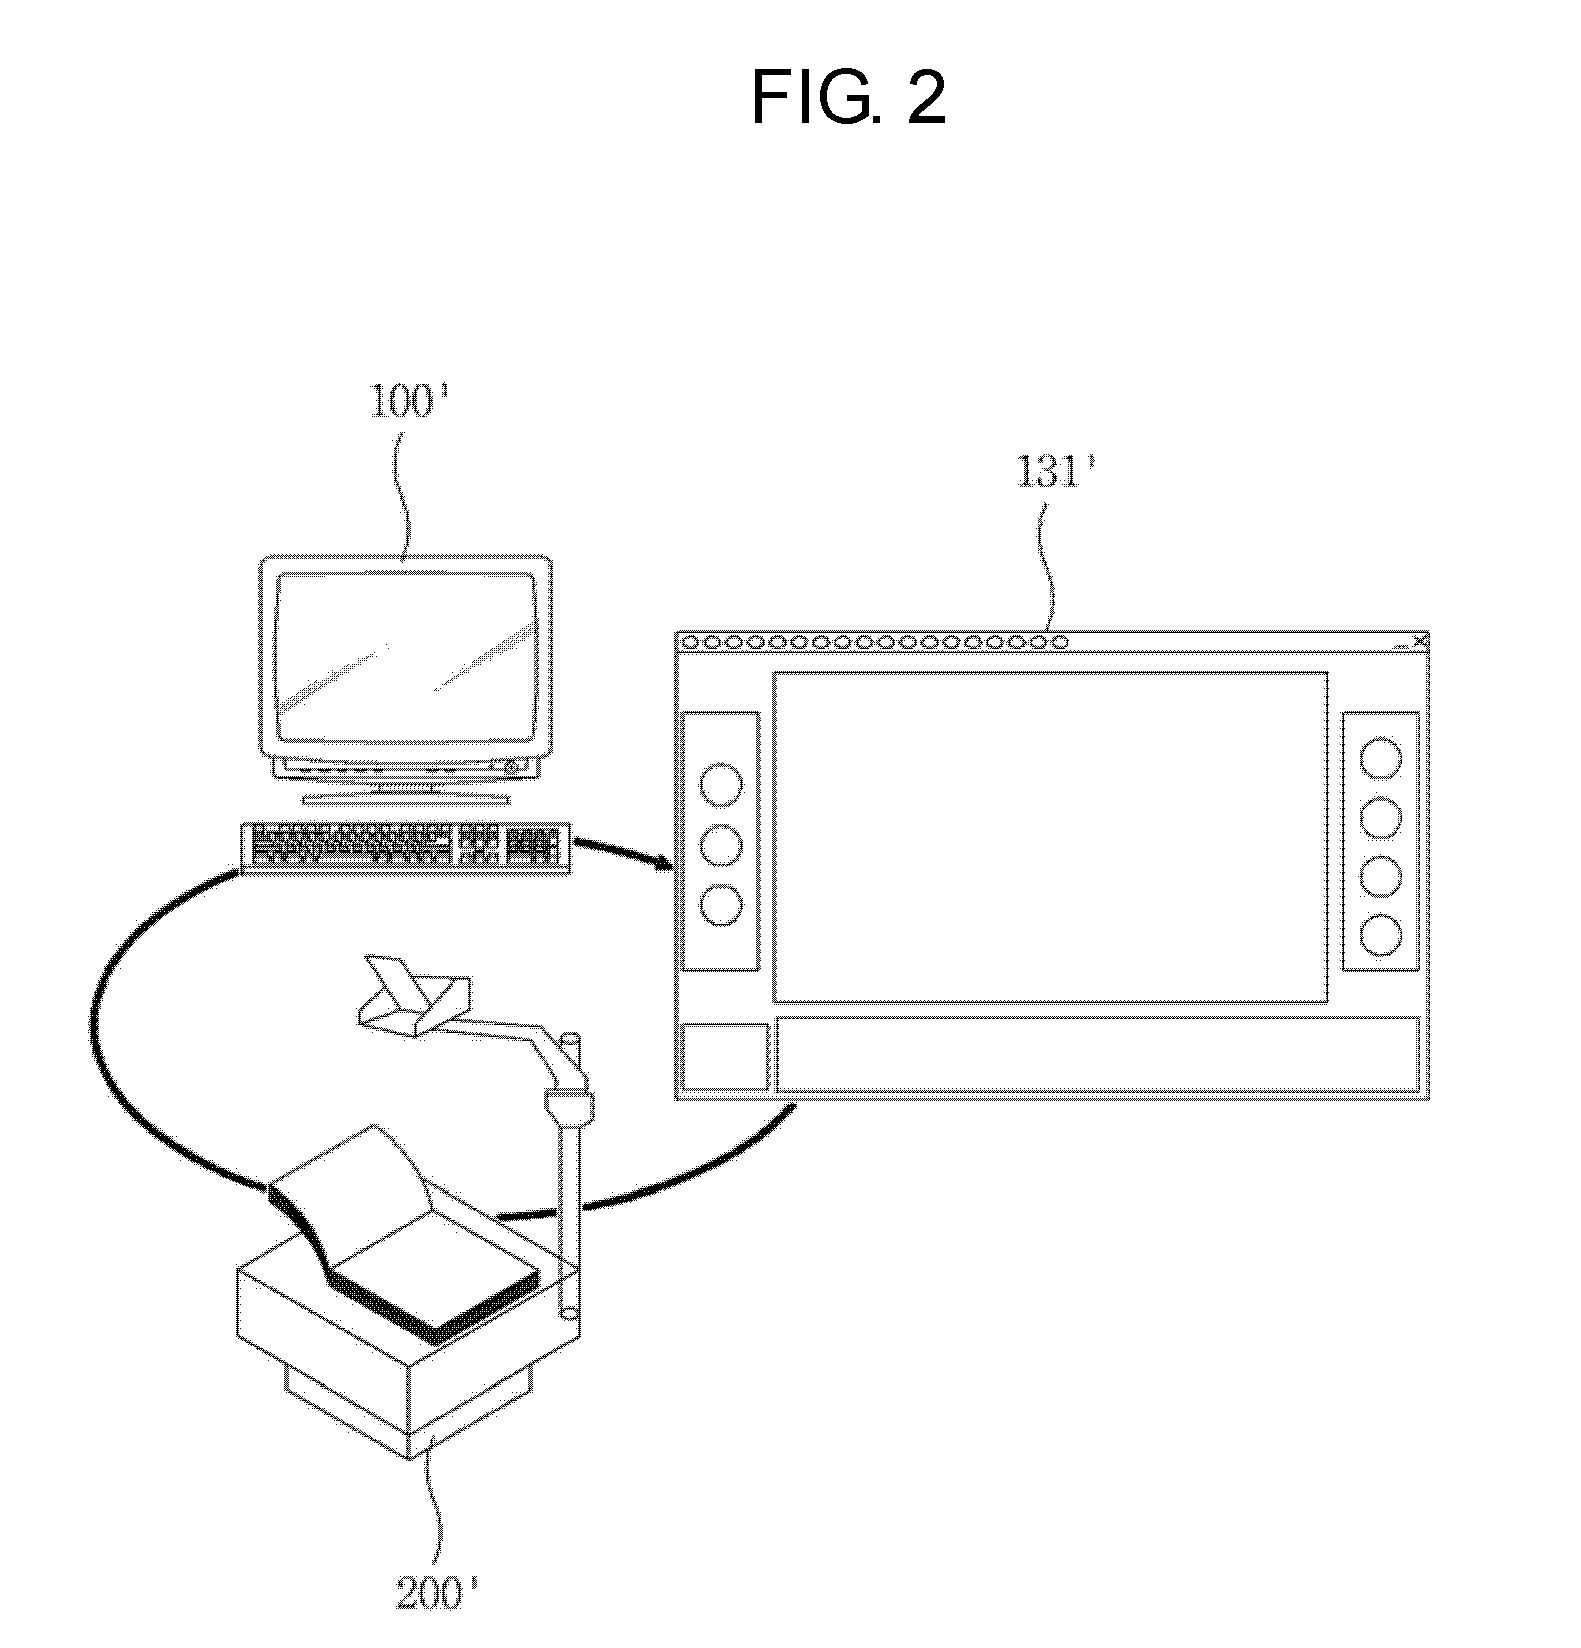 Image linkage tuition device